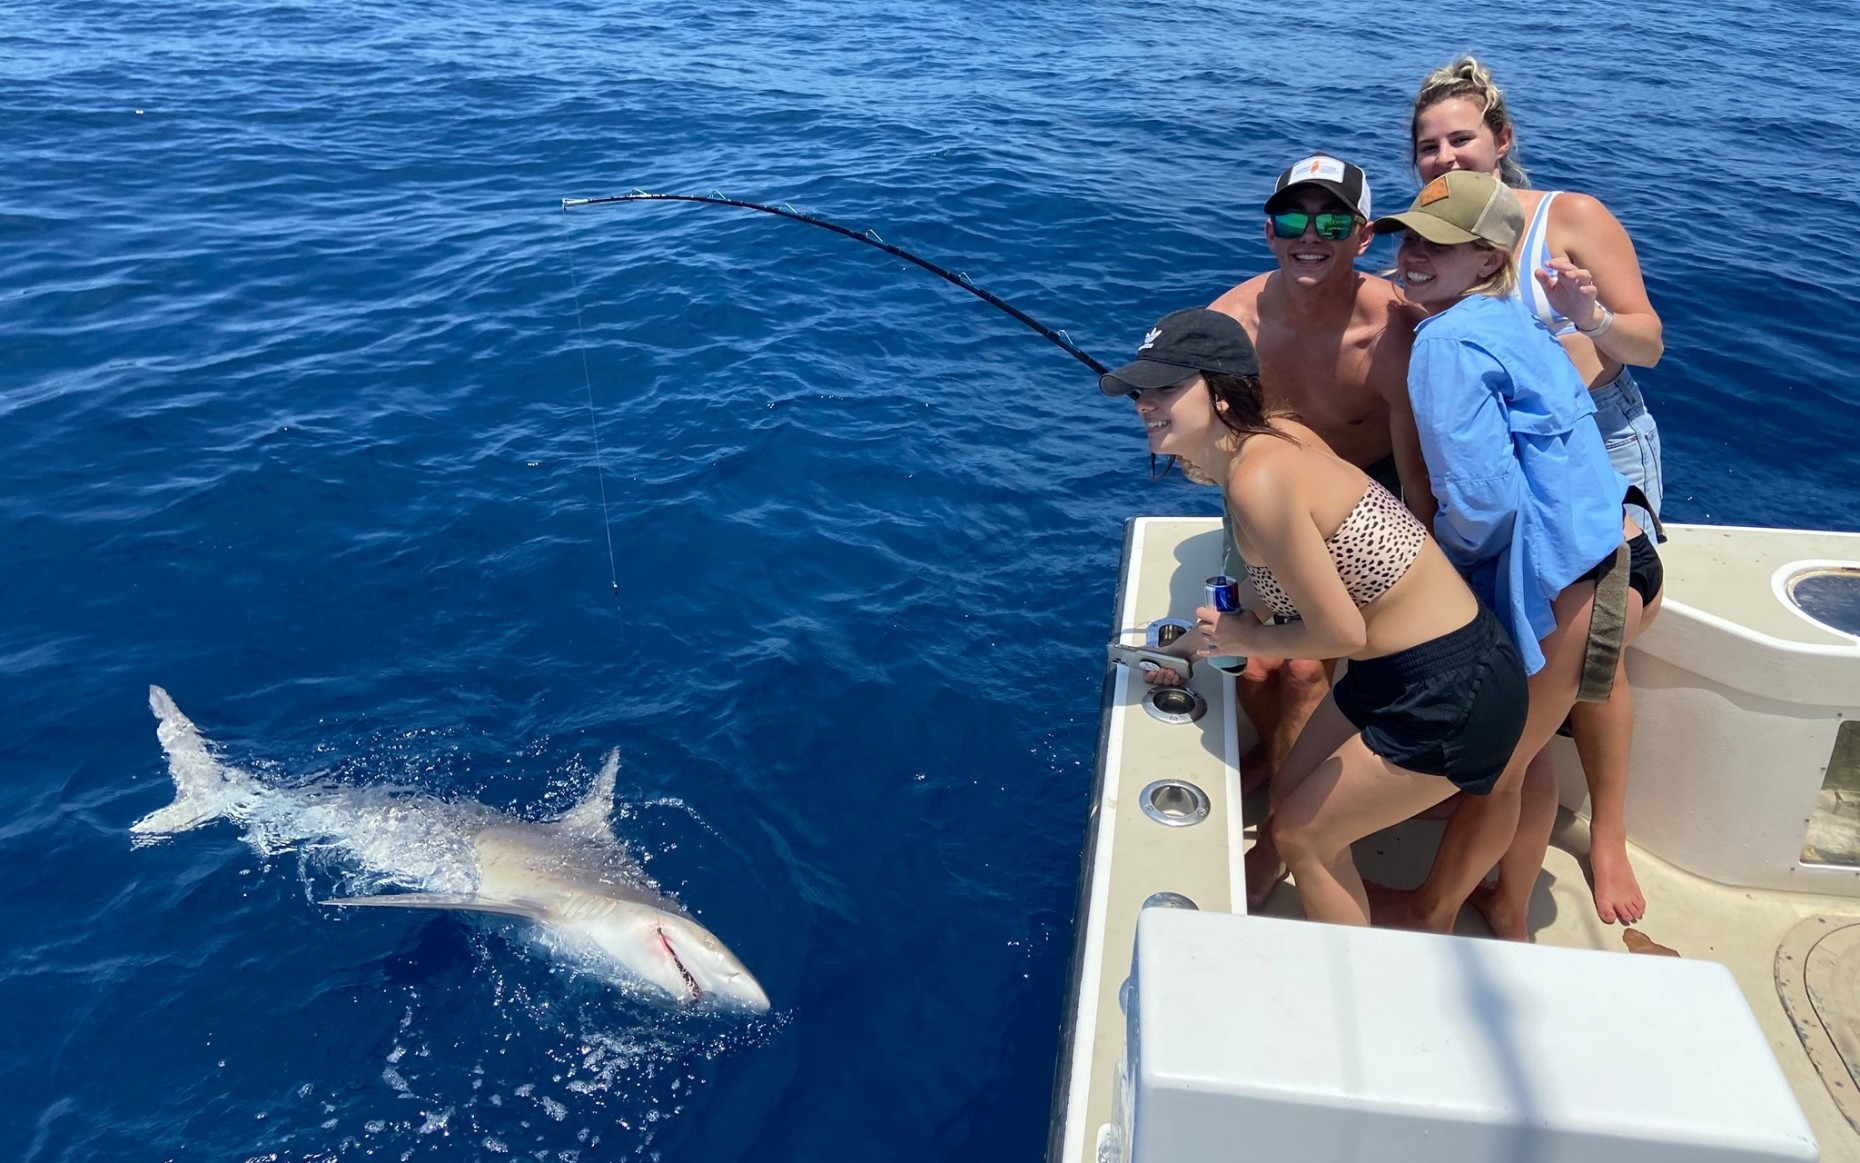 Thrilling Daytime Shark Fishing Adventure: Book Tours & Activities at